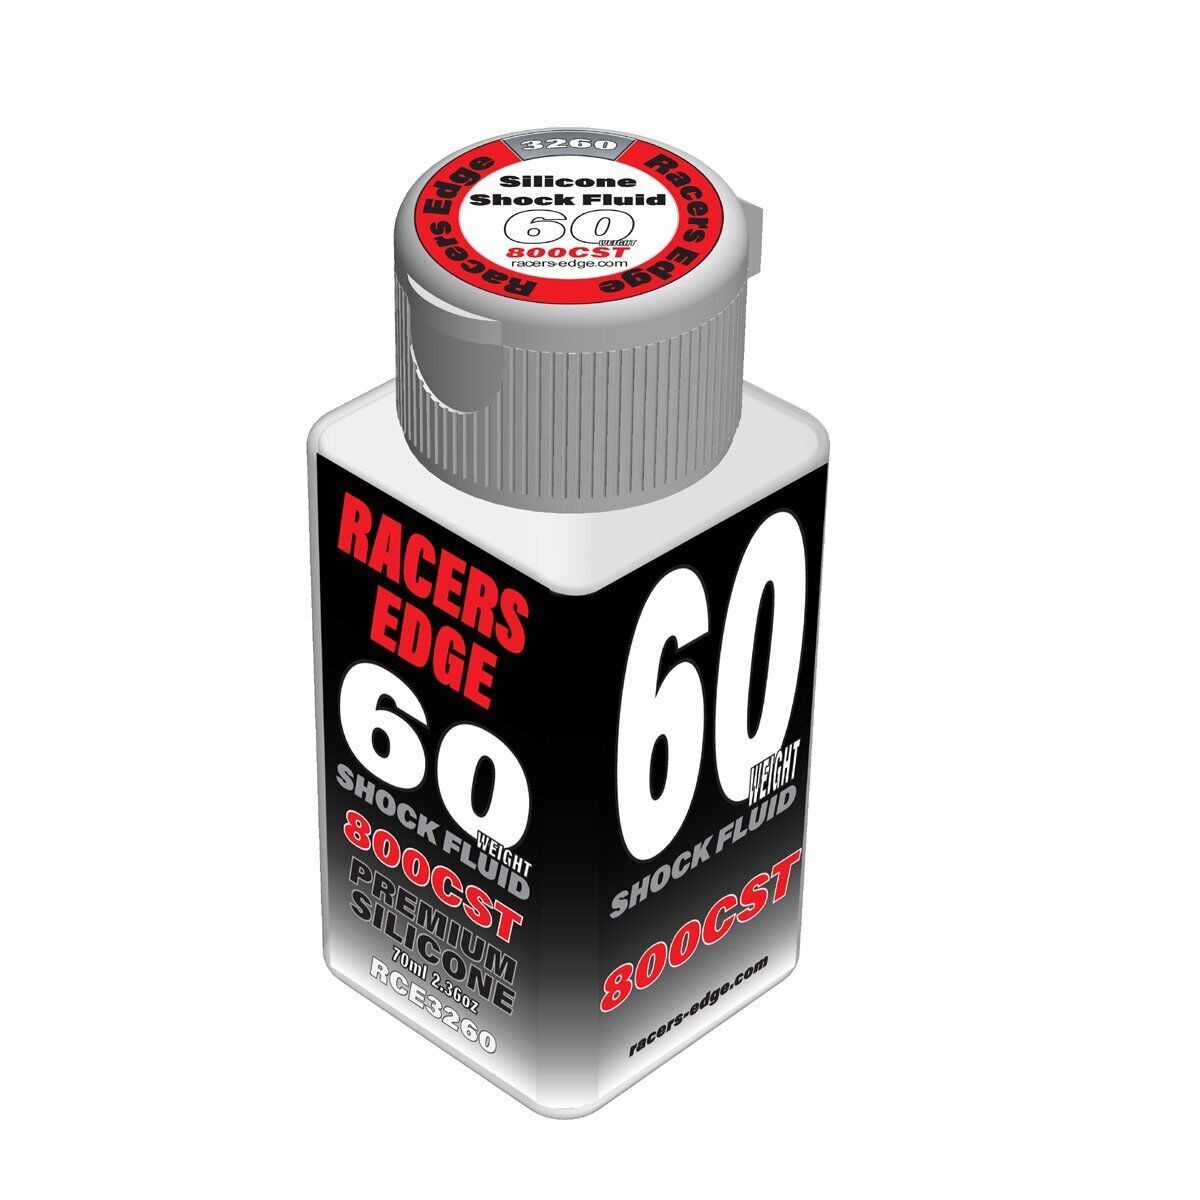 Racers Edge Rce3260 60 Weight 800cst 70ml 2.36oz Pure Silicone Shock Oil